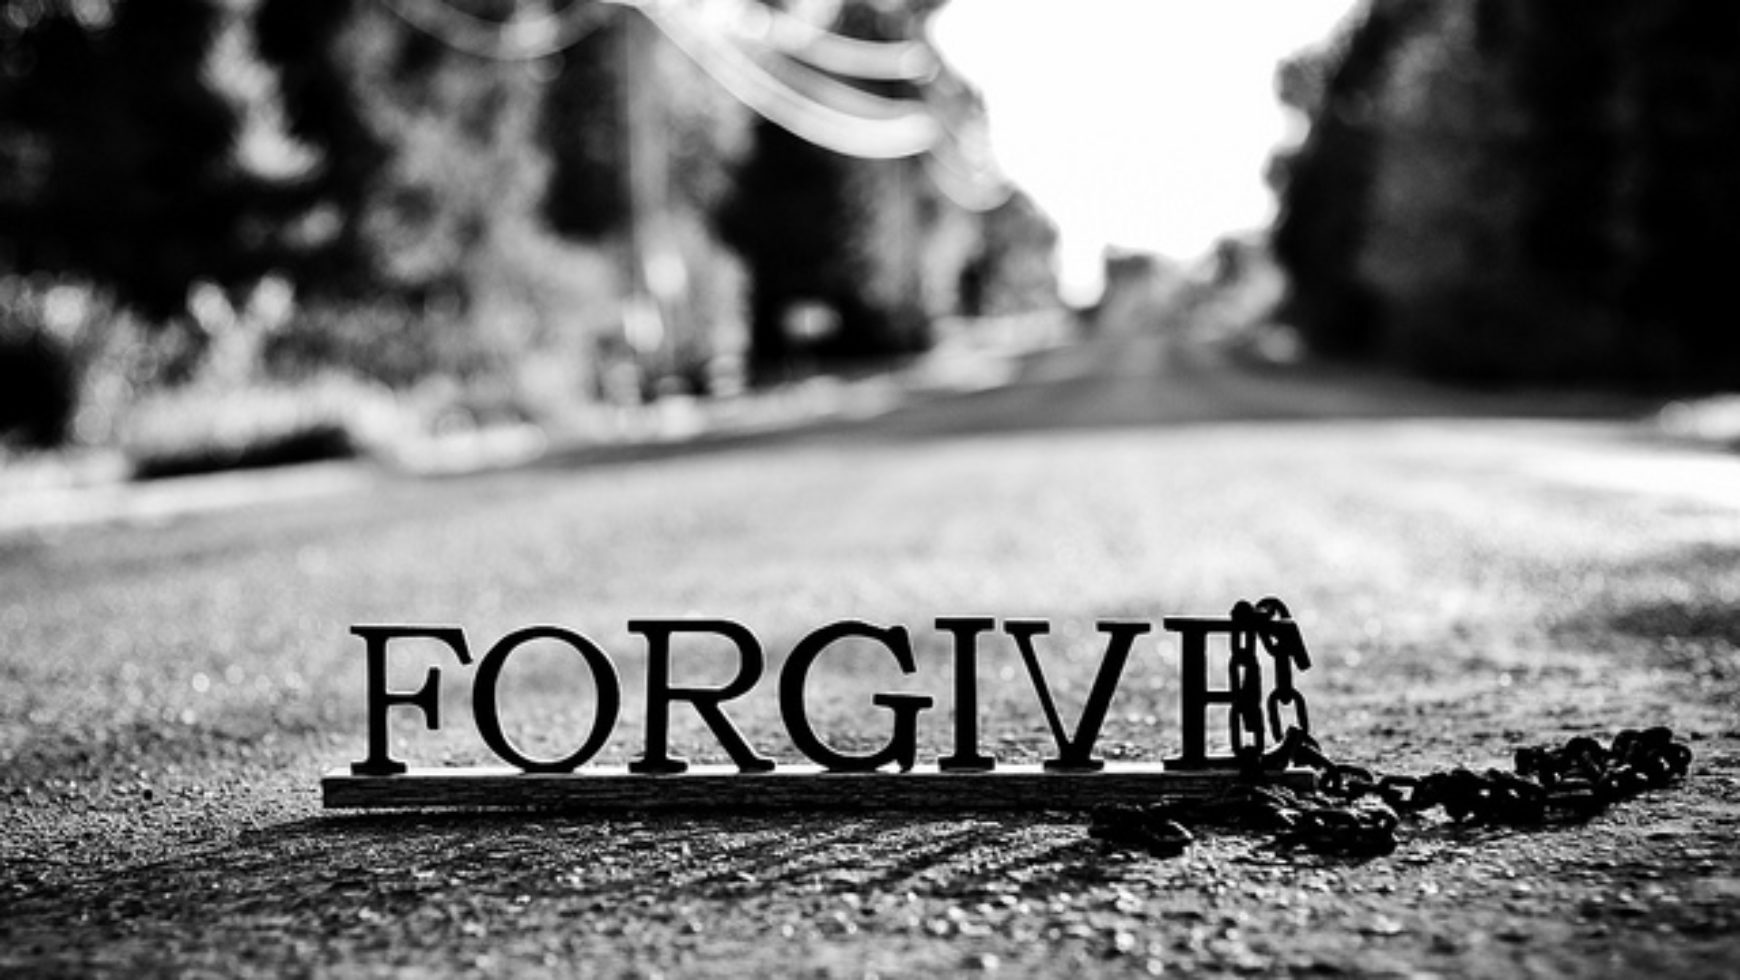 Forgiveness: An Act and a Process